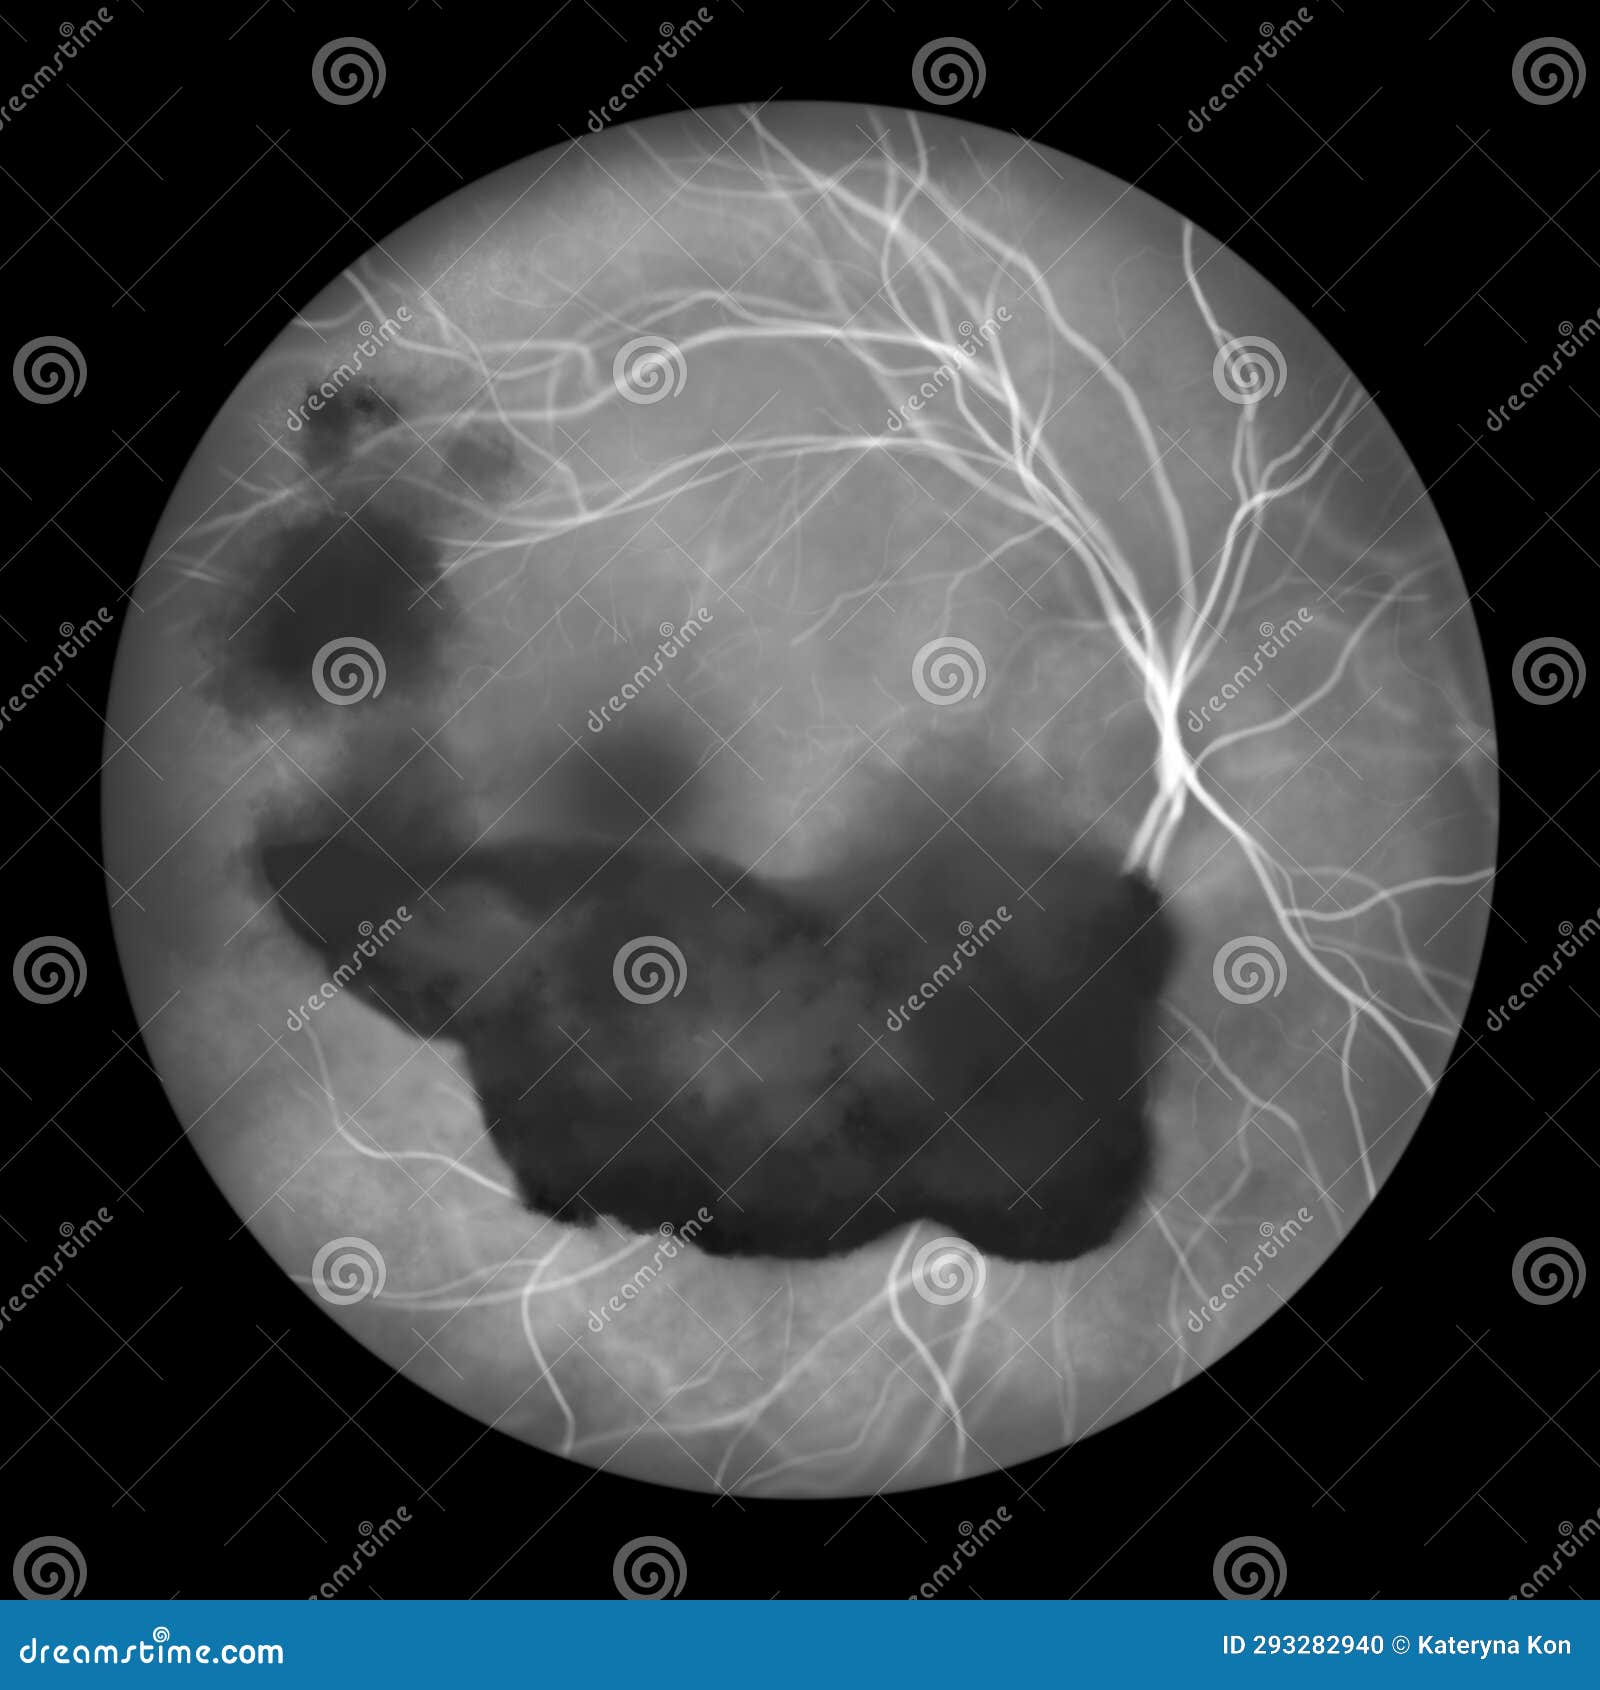 vitreous hemorrhage as observed during ophthalmoscopy, 